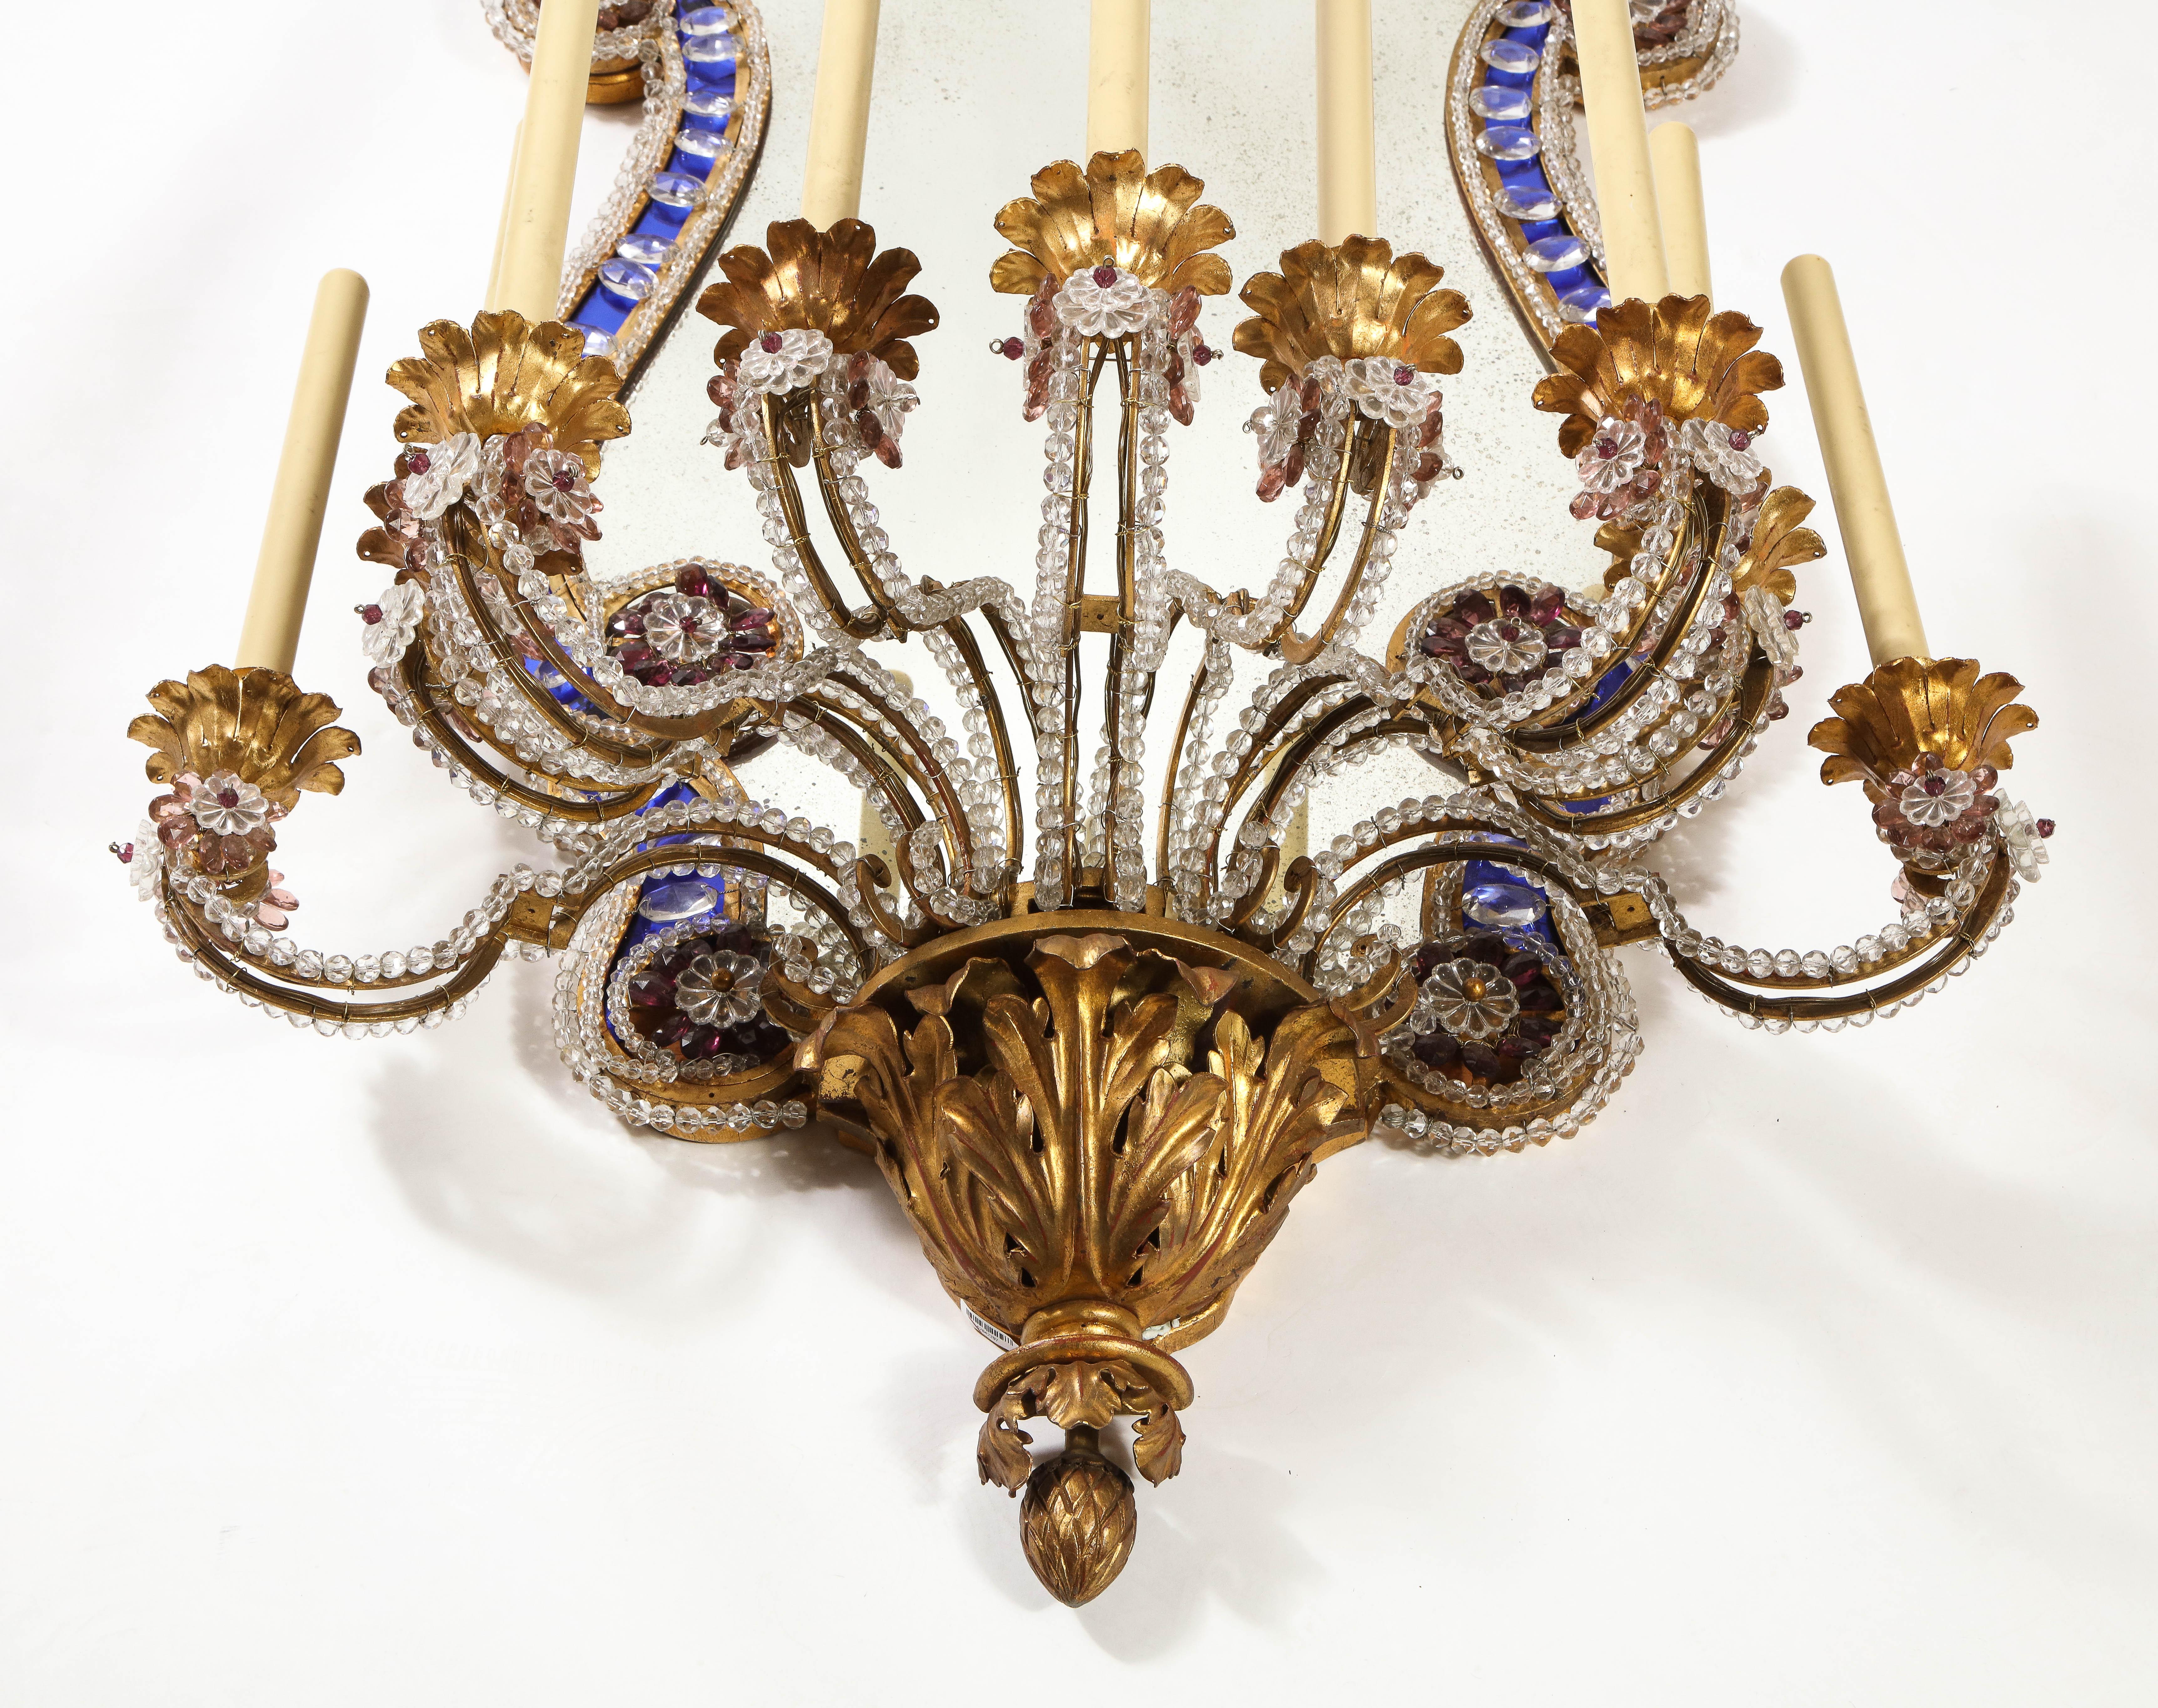 Pr French 20th C Dore Bronze Mnt Mirrored & Beaded Crystal 9-Arm Sconces For Sale 2